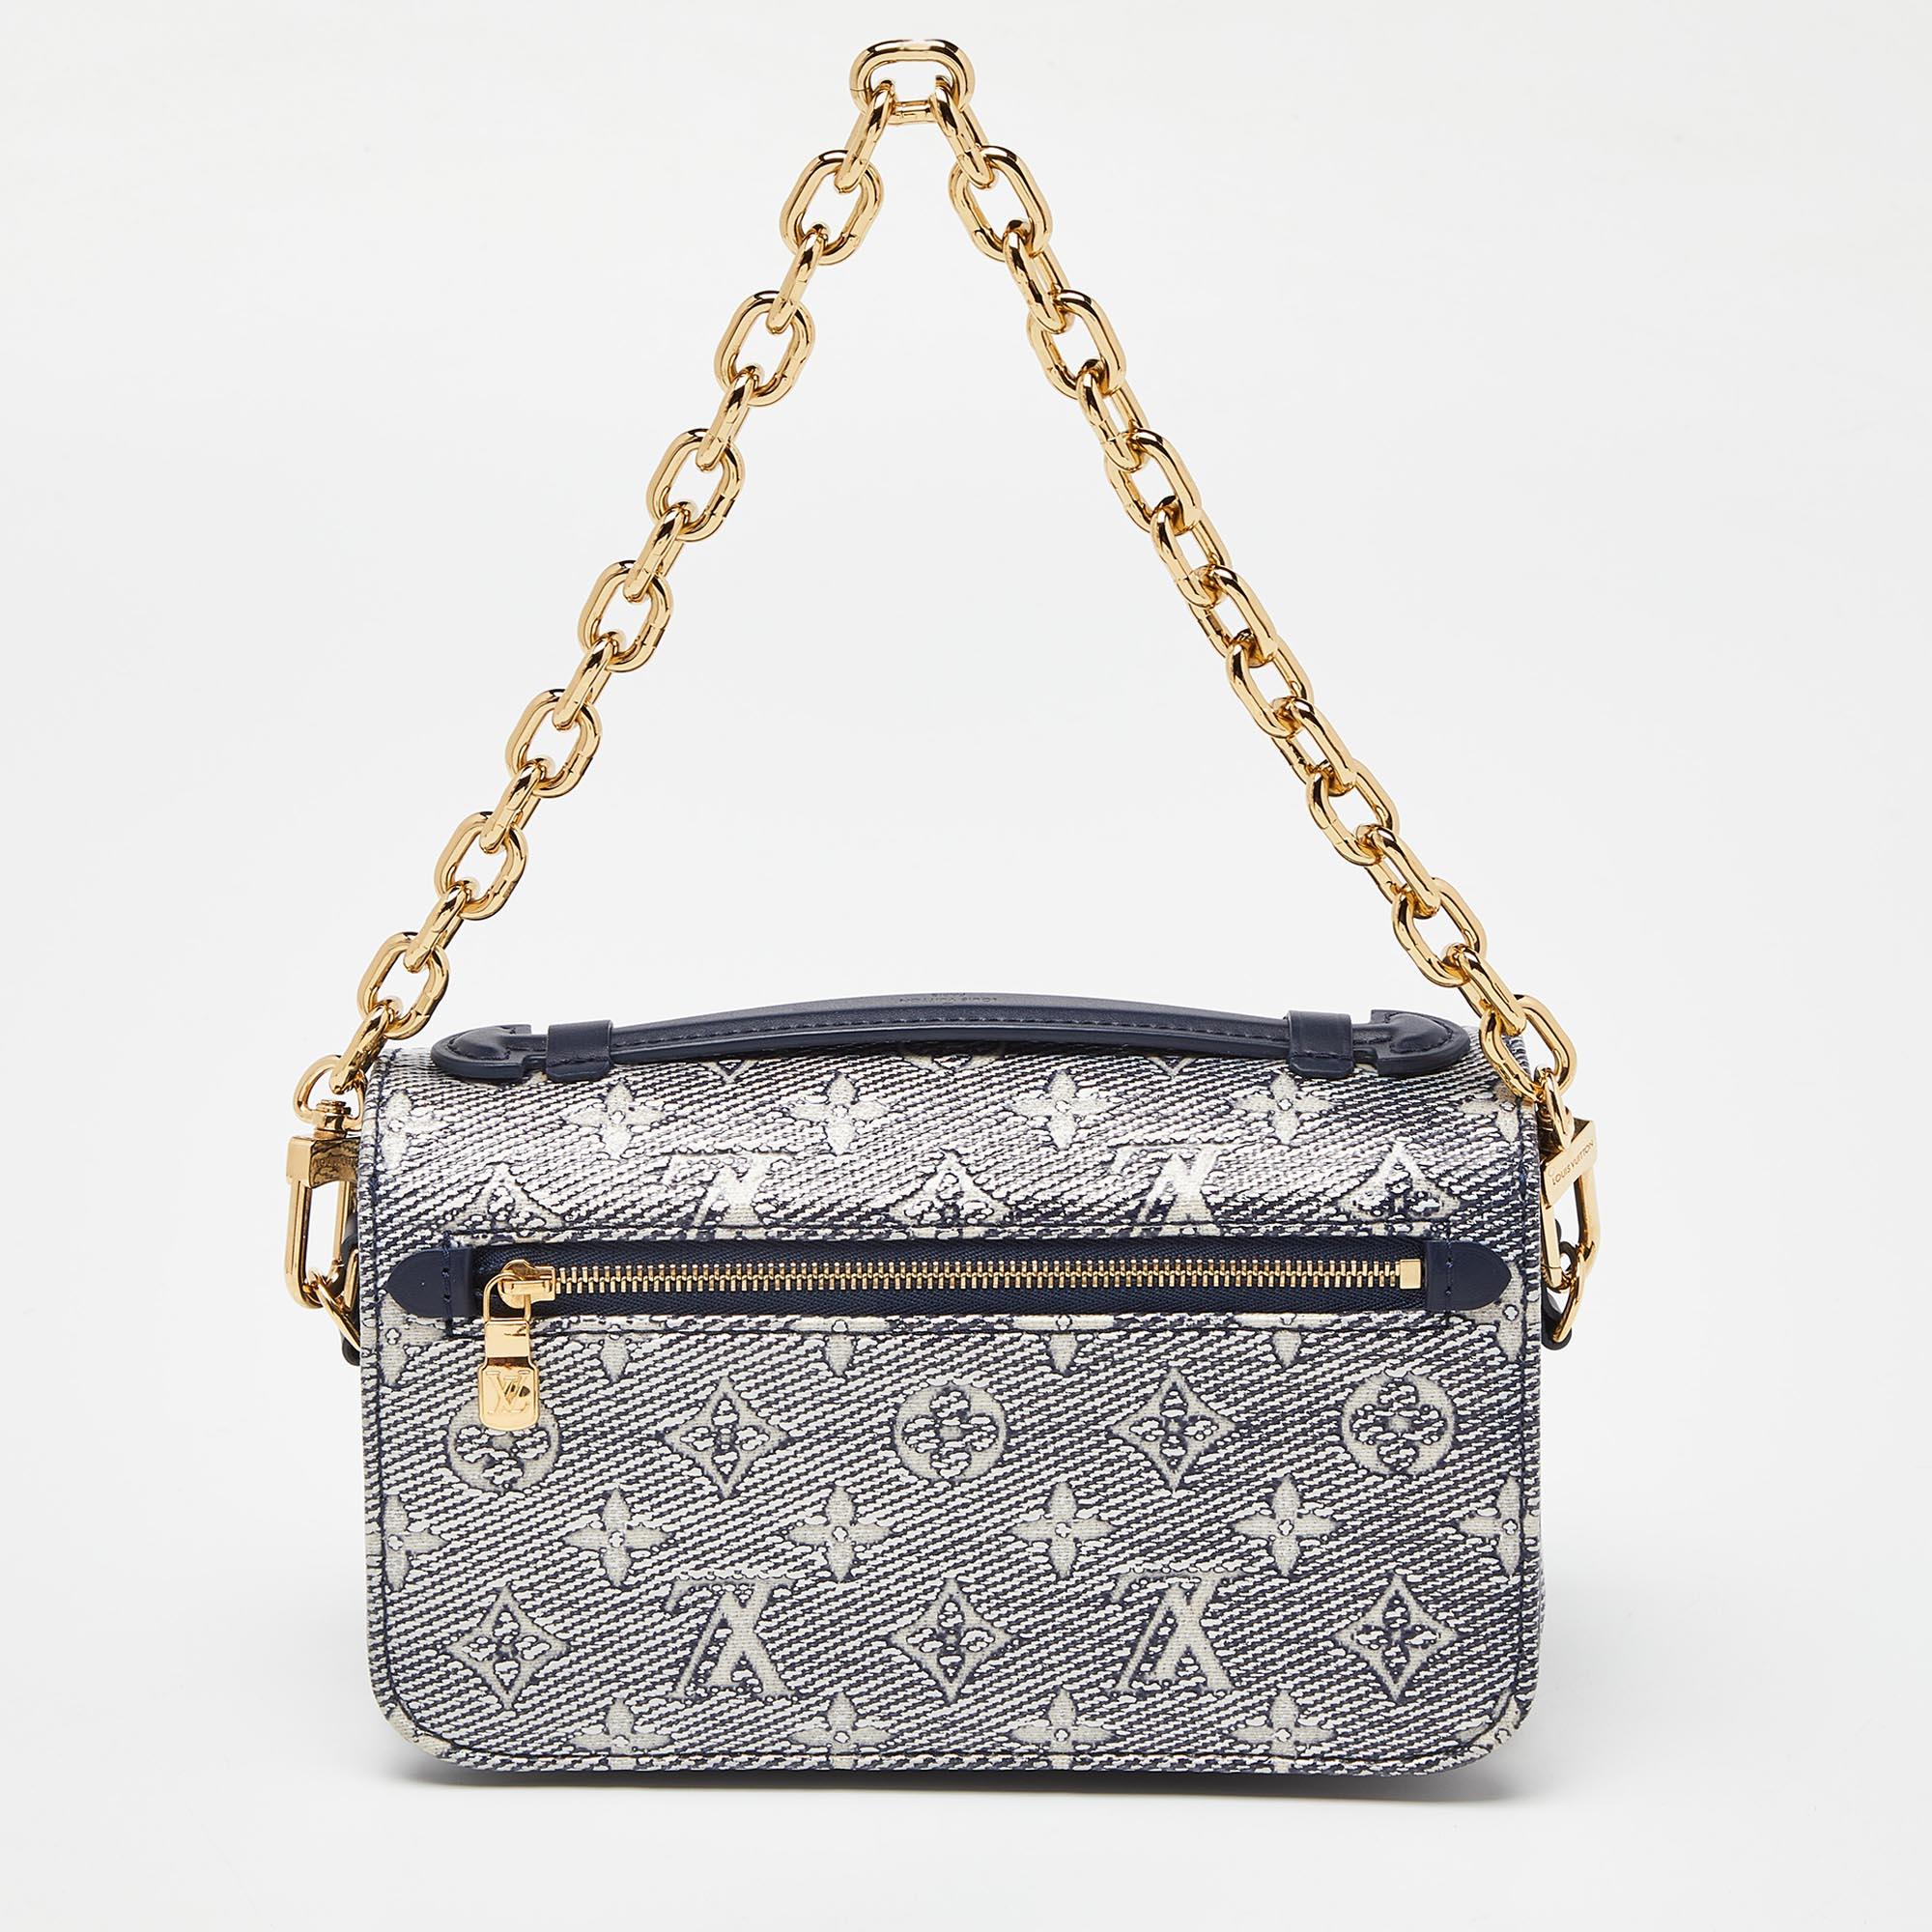 Crafted from Louis Vuitton's iconic blue monogram canvas, the Pochette Metis East West Bag exudes timeless elegance. With its sleek silhouette and gold-tone hardware, it effortlessly combines style and functionality. The spacious interior and